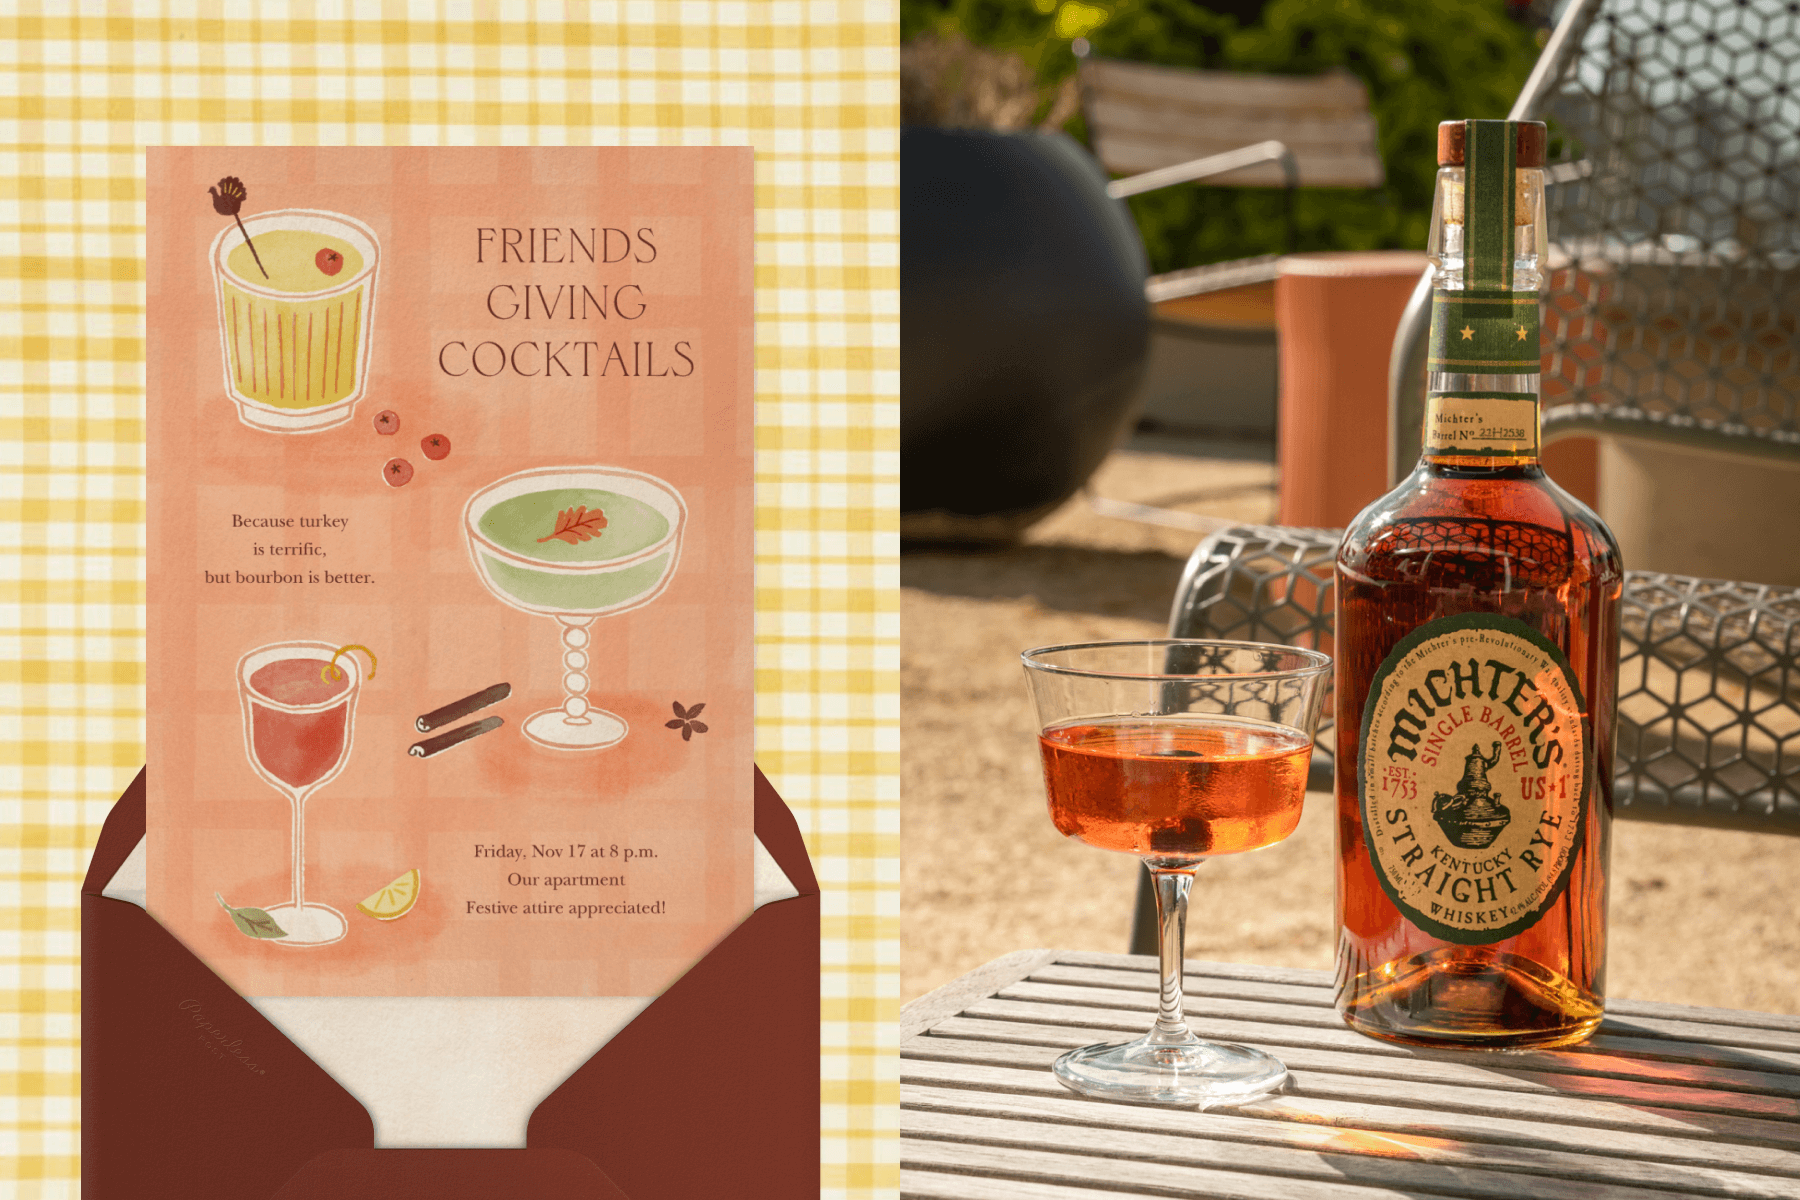 Left: A pink invitation for Friendsgiving cocktails has illustrations of three autumnal pastel cocktails. Right: A bottle of Rye next to a coupe glass filled with Rye in an outdoor setting.